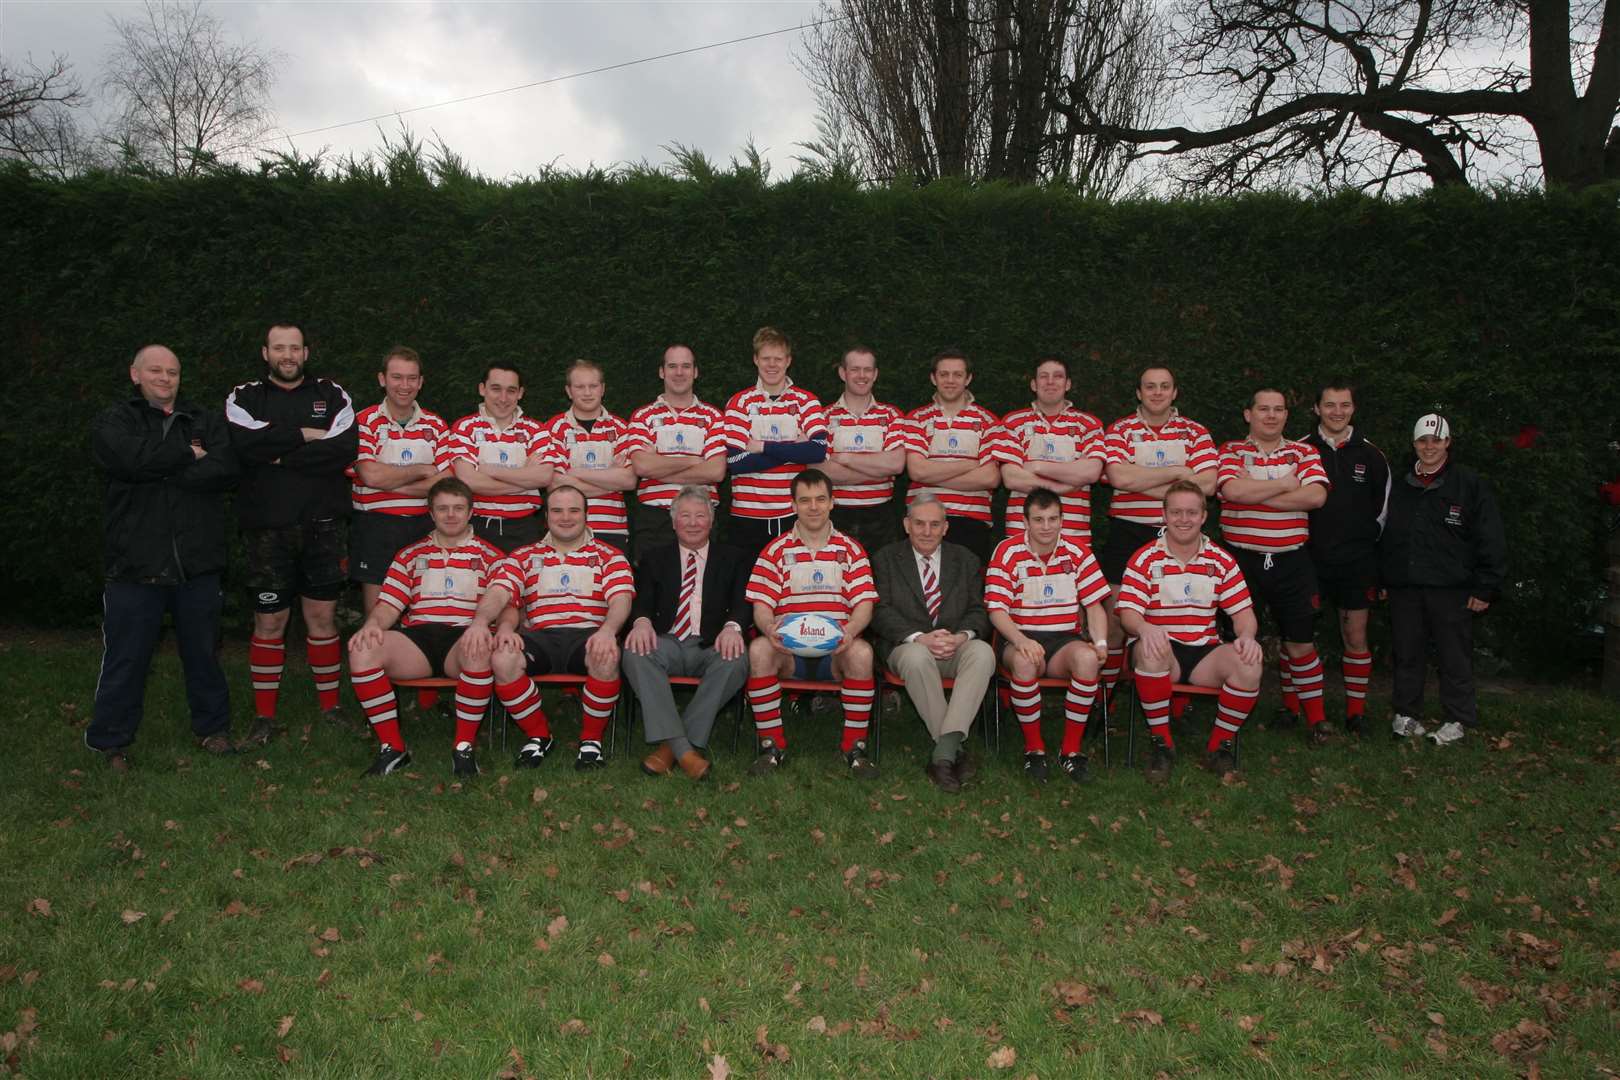 A Maidstone RFC team picture from 2005, with Ray Vale, than club president, sitting to the right of team captain John Sergeant